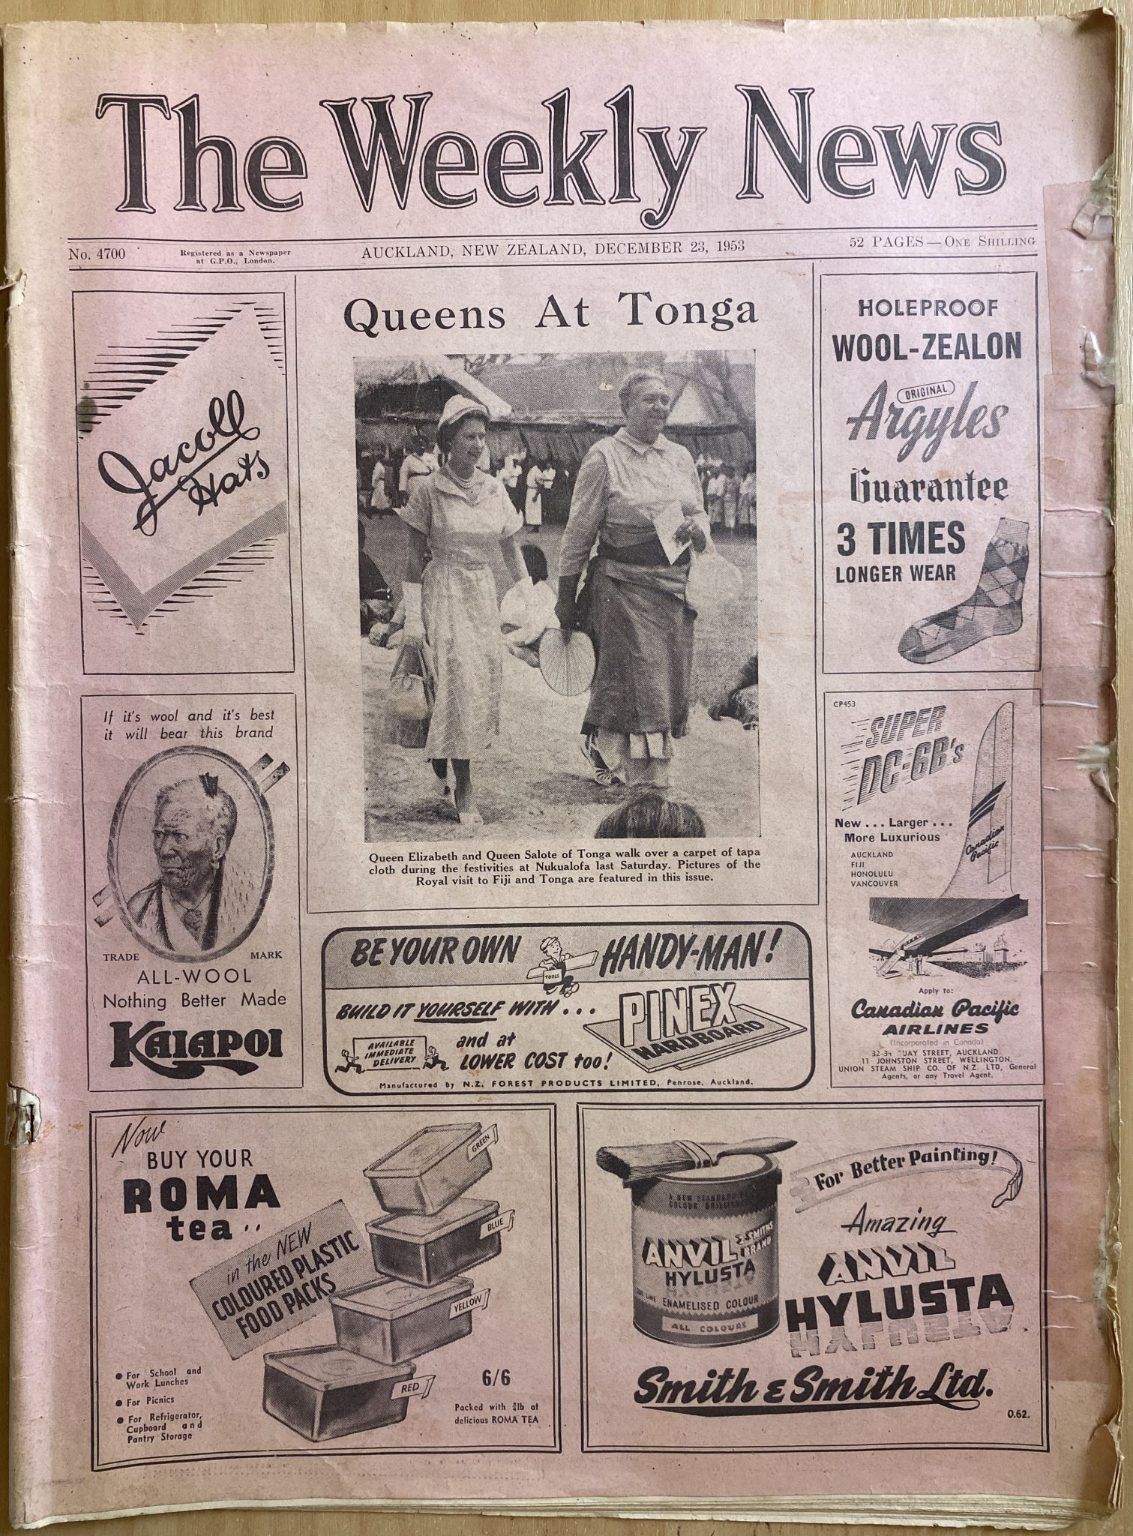 OLD NEWSPAPER: The Weekly News - No. 4700, 23 December 1953